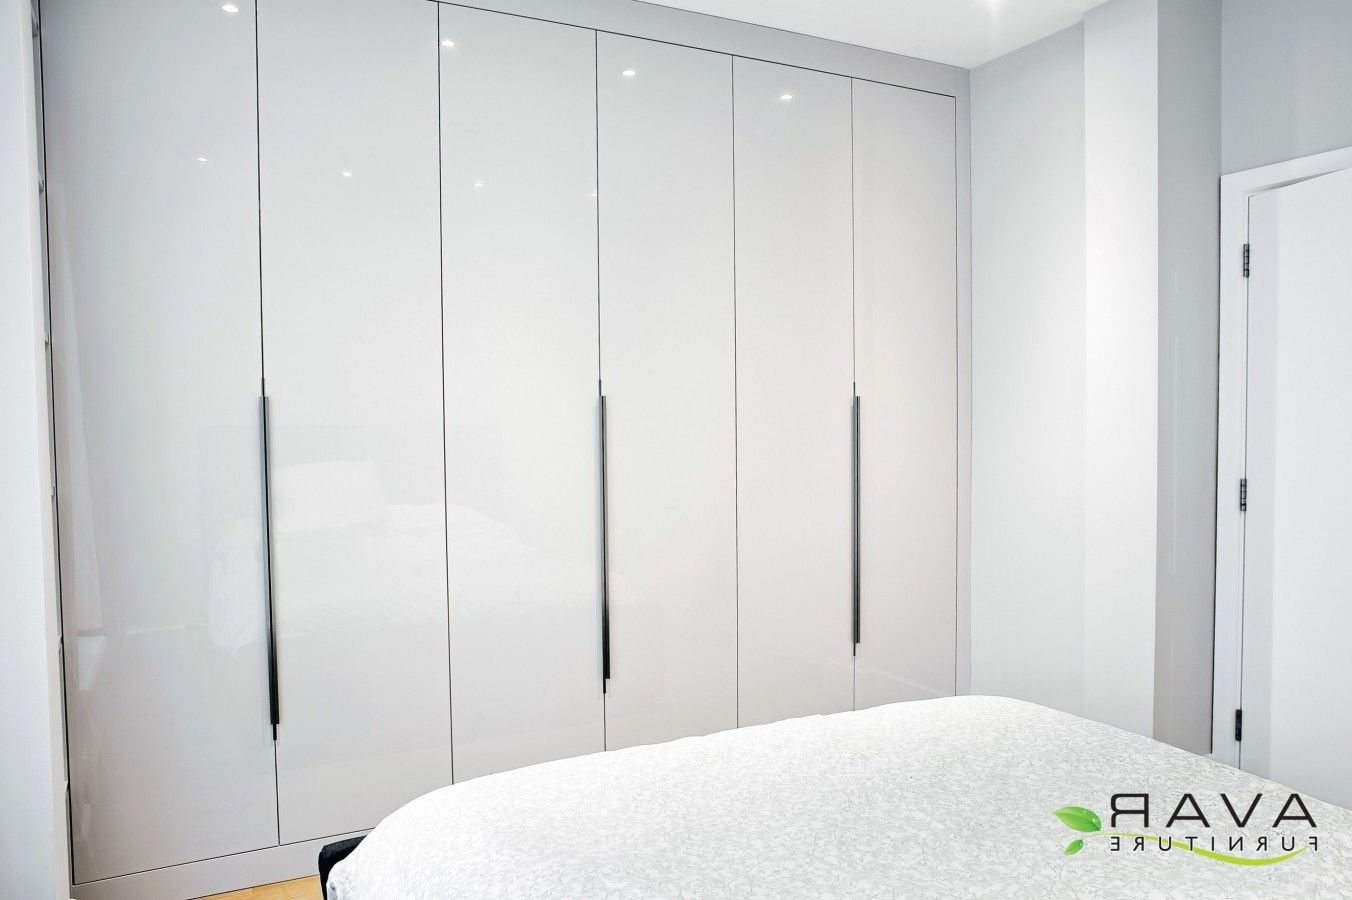 High Gloss Wardrobe From Avar Furniture | Fitted Bedroom Furniture, Wardrobe  Room, White Gloss Bedroom With White High Gloss Wardrobes (Gallery 20 of 20)